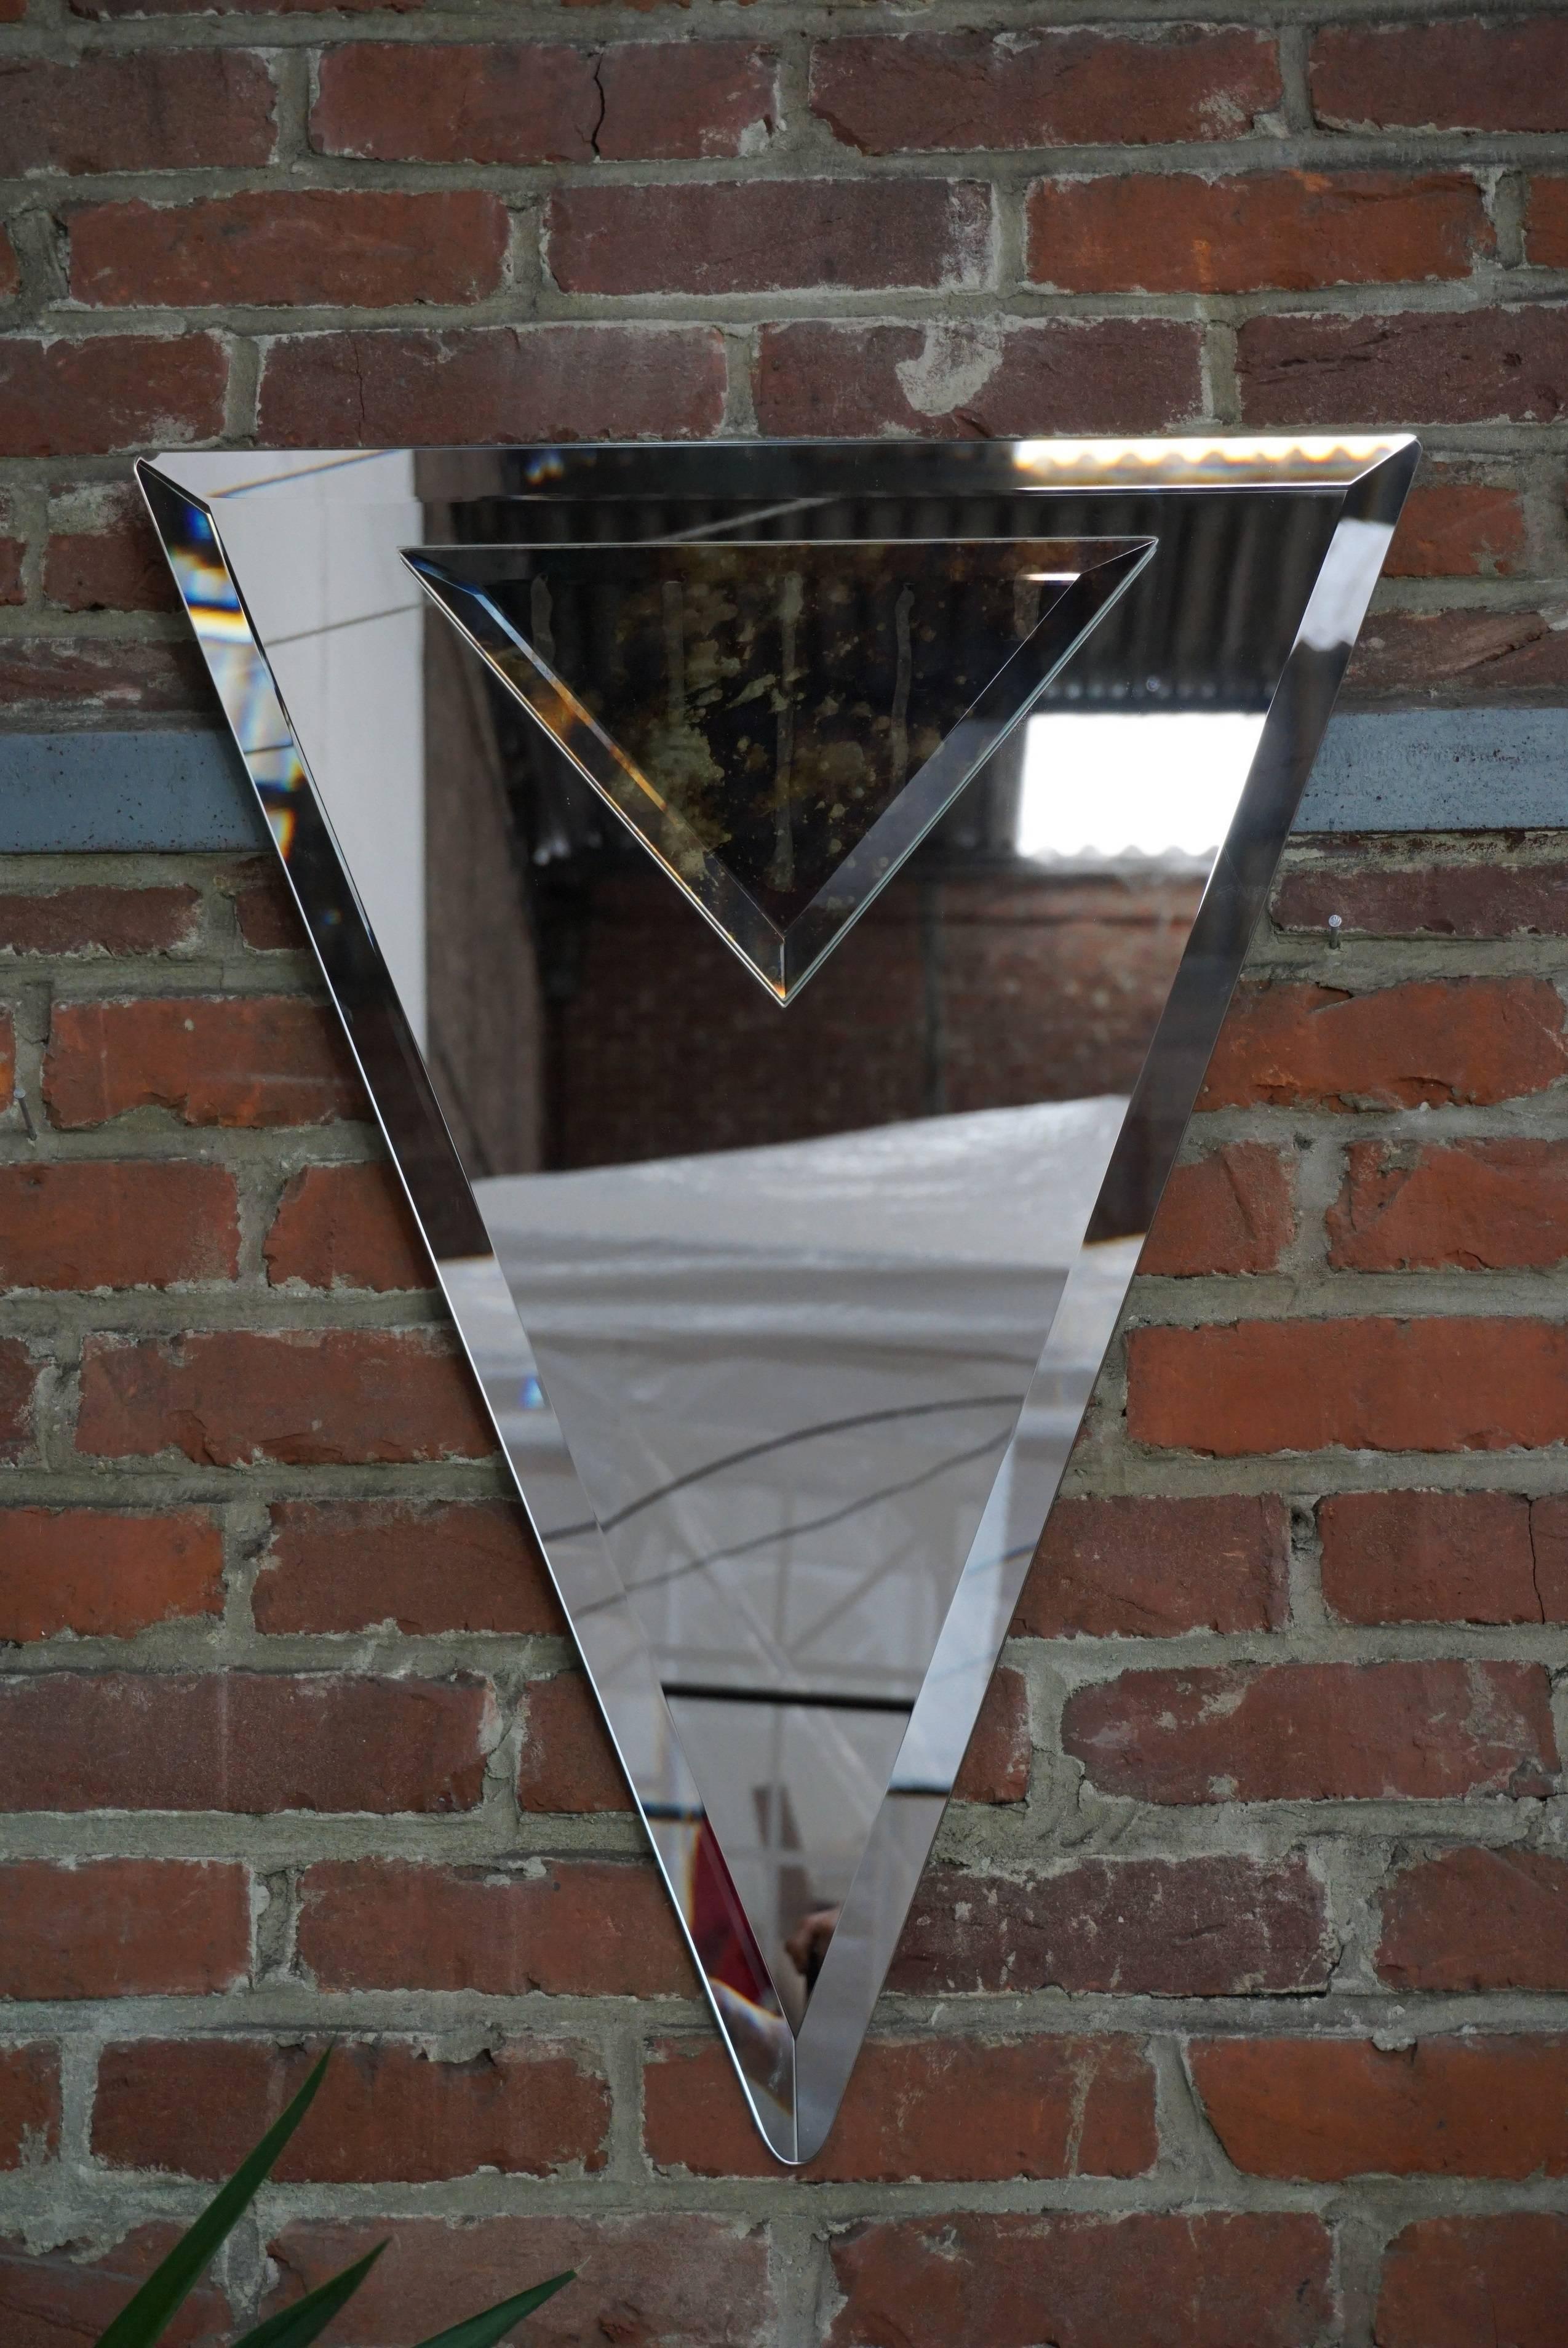 Superb old mirror, bevelled, triangular in shape and Art Deco style, presenting a beautiful setting abyss with its small triangle mirror embedded in mercurised tan bronze, the most beautiful effect!